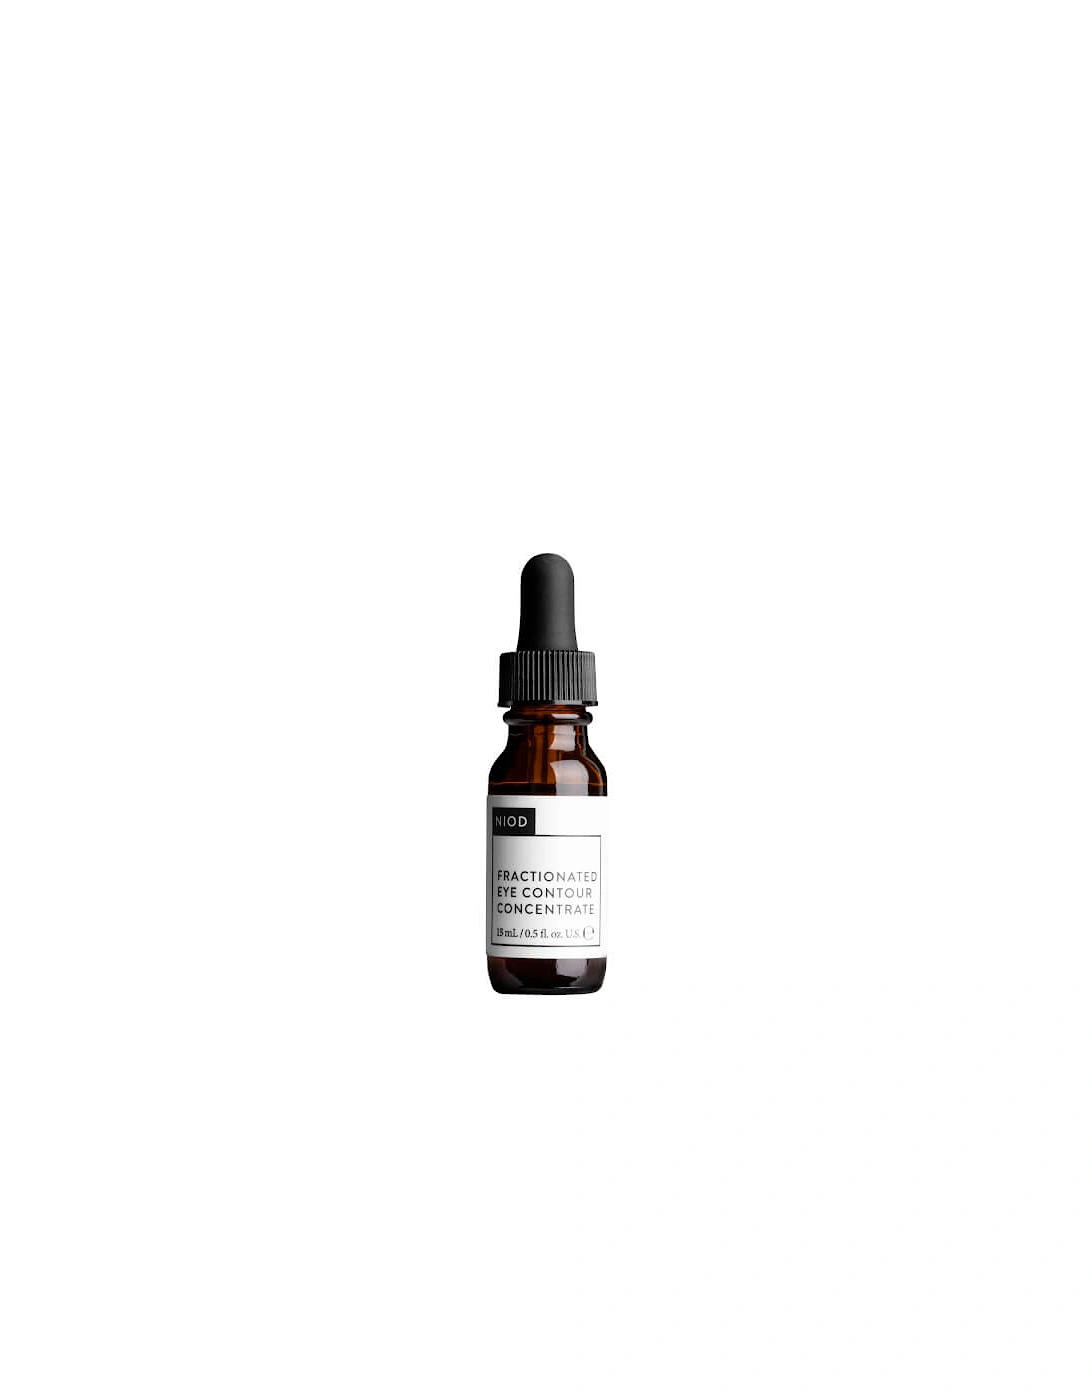 Fractionated Eye Contour Concentrate Serum 15ml - NIOD, 2 of 1